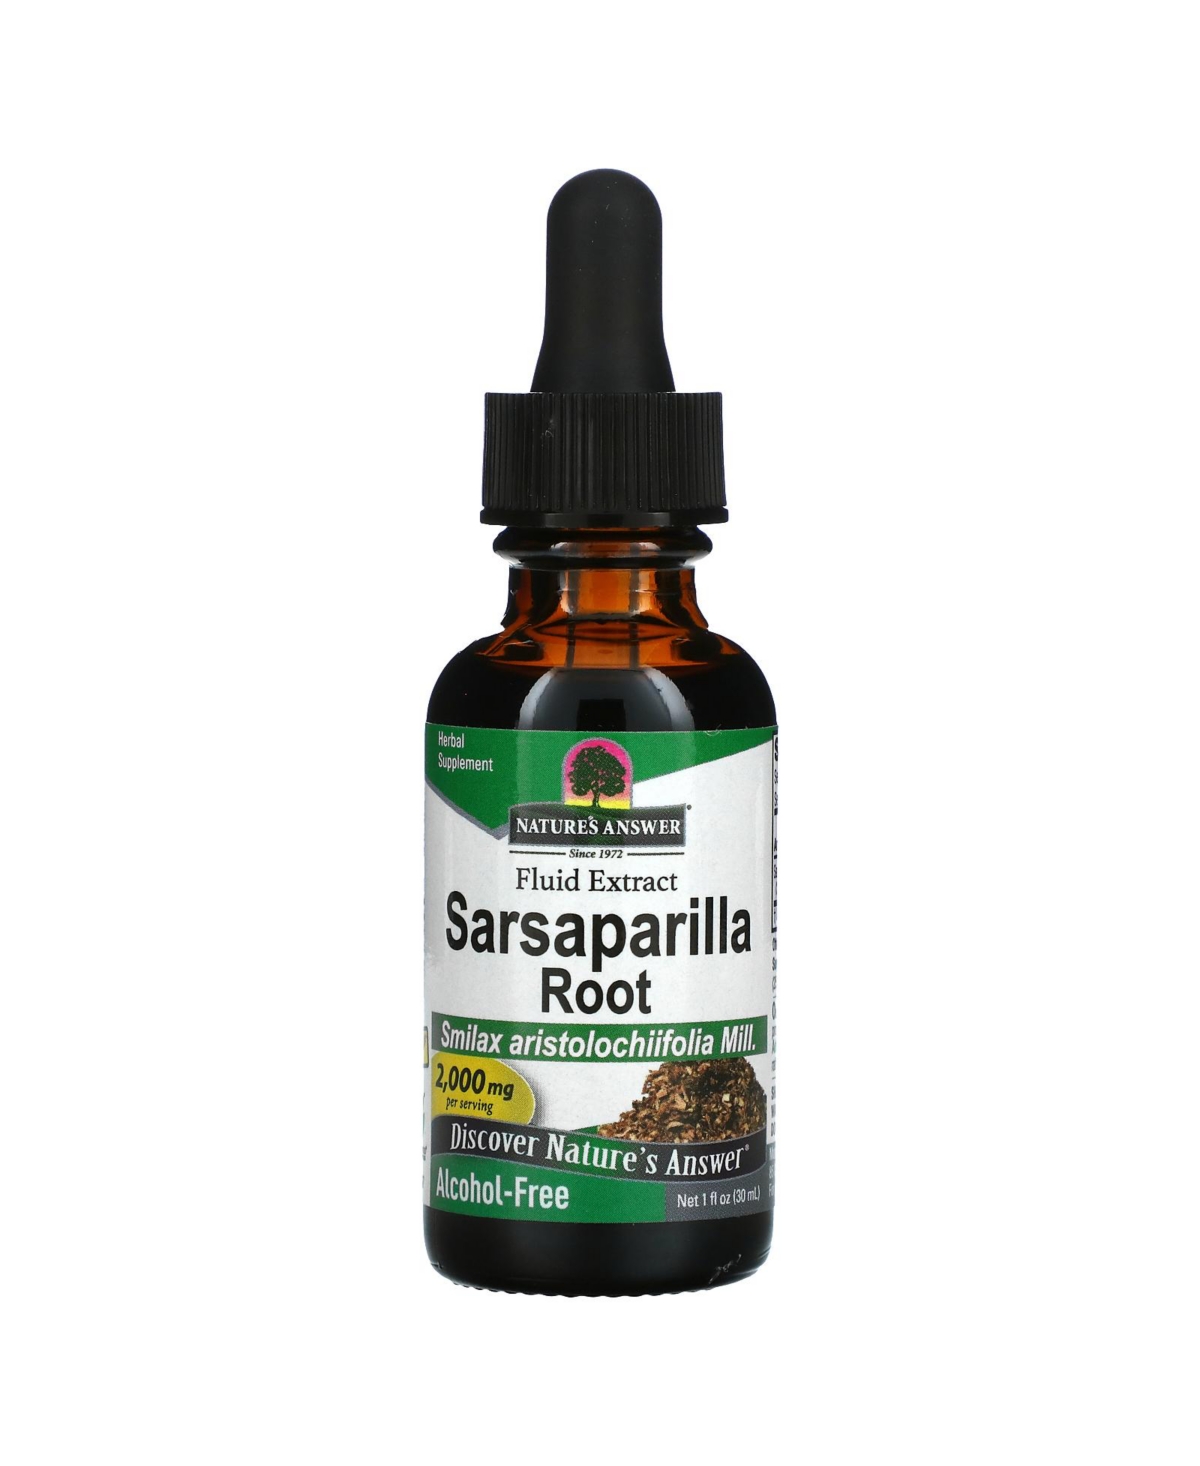 Sarsaparilla Root Fluid Extract Alcohol Free 2 000 mg - 1 fl oz (30 ml) - Assorted Pre-Pack